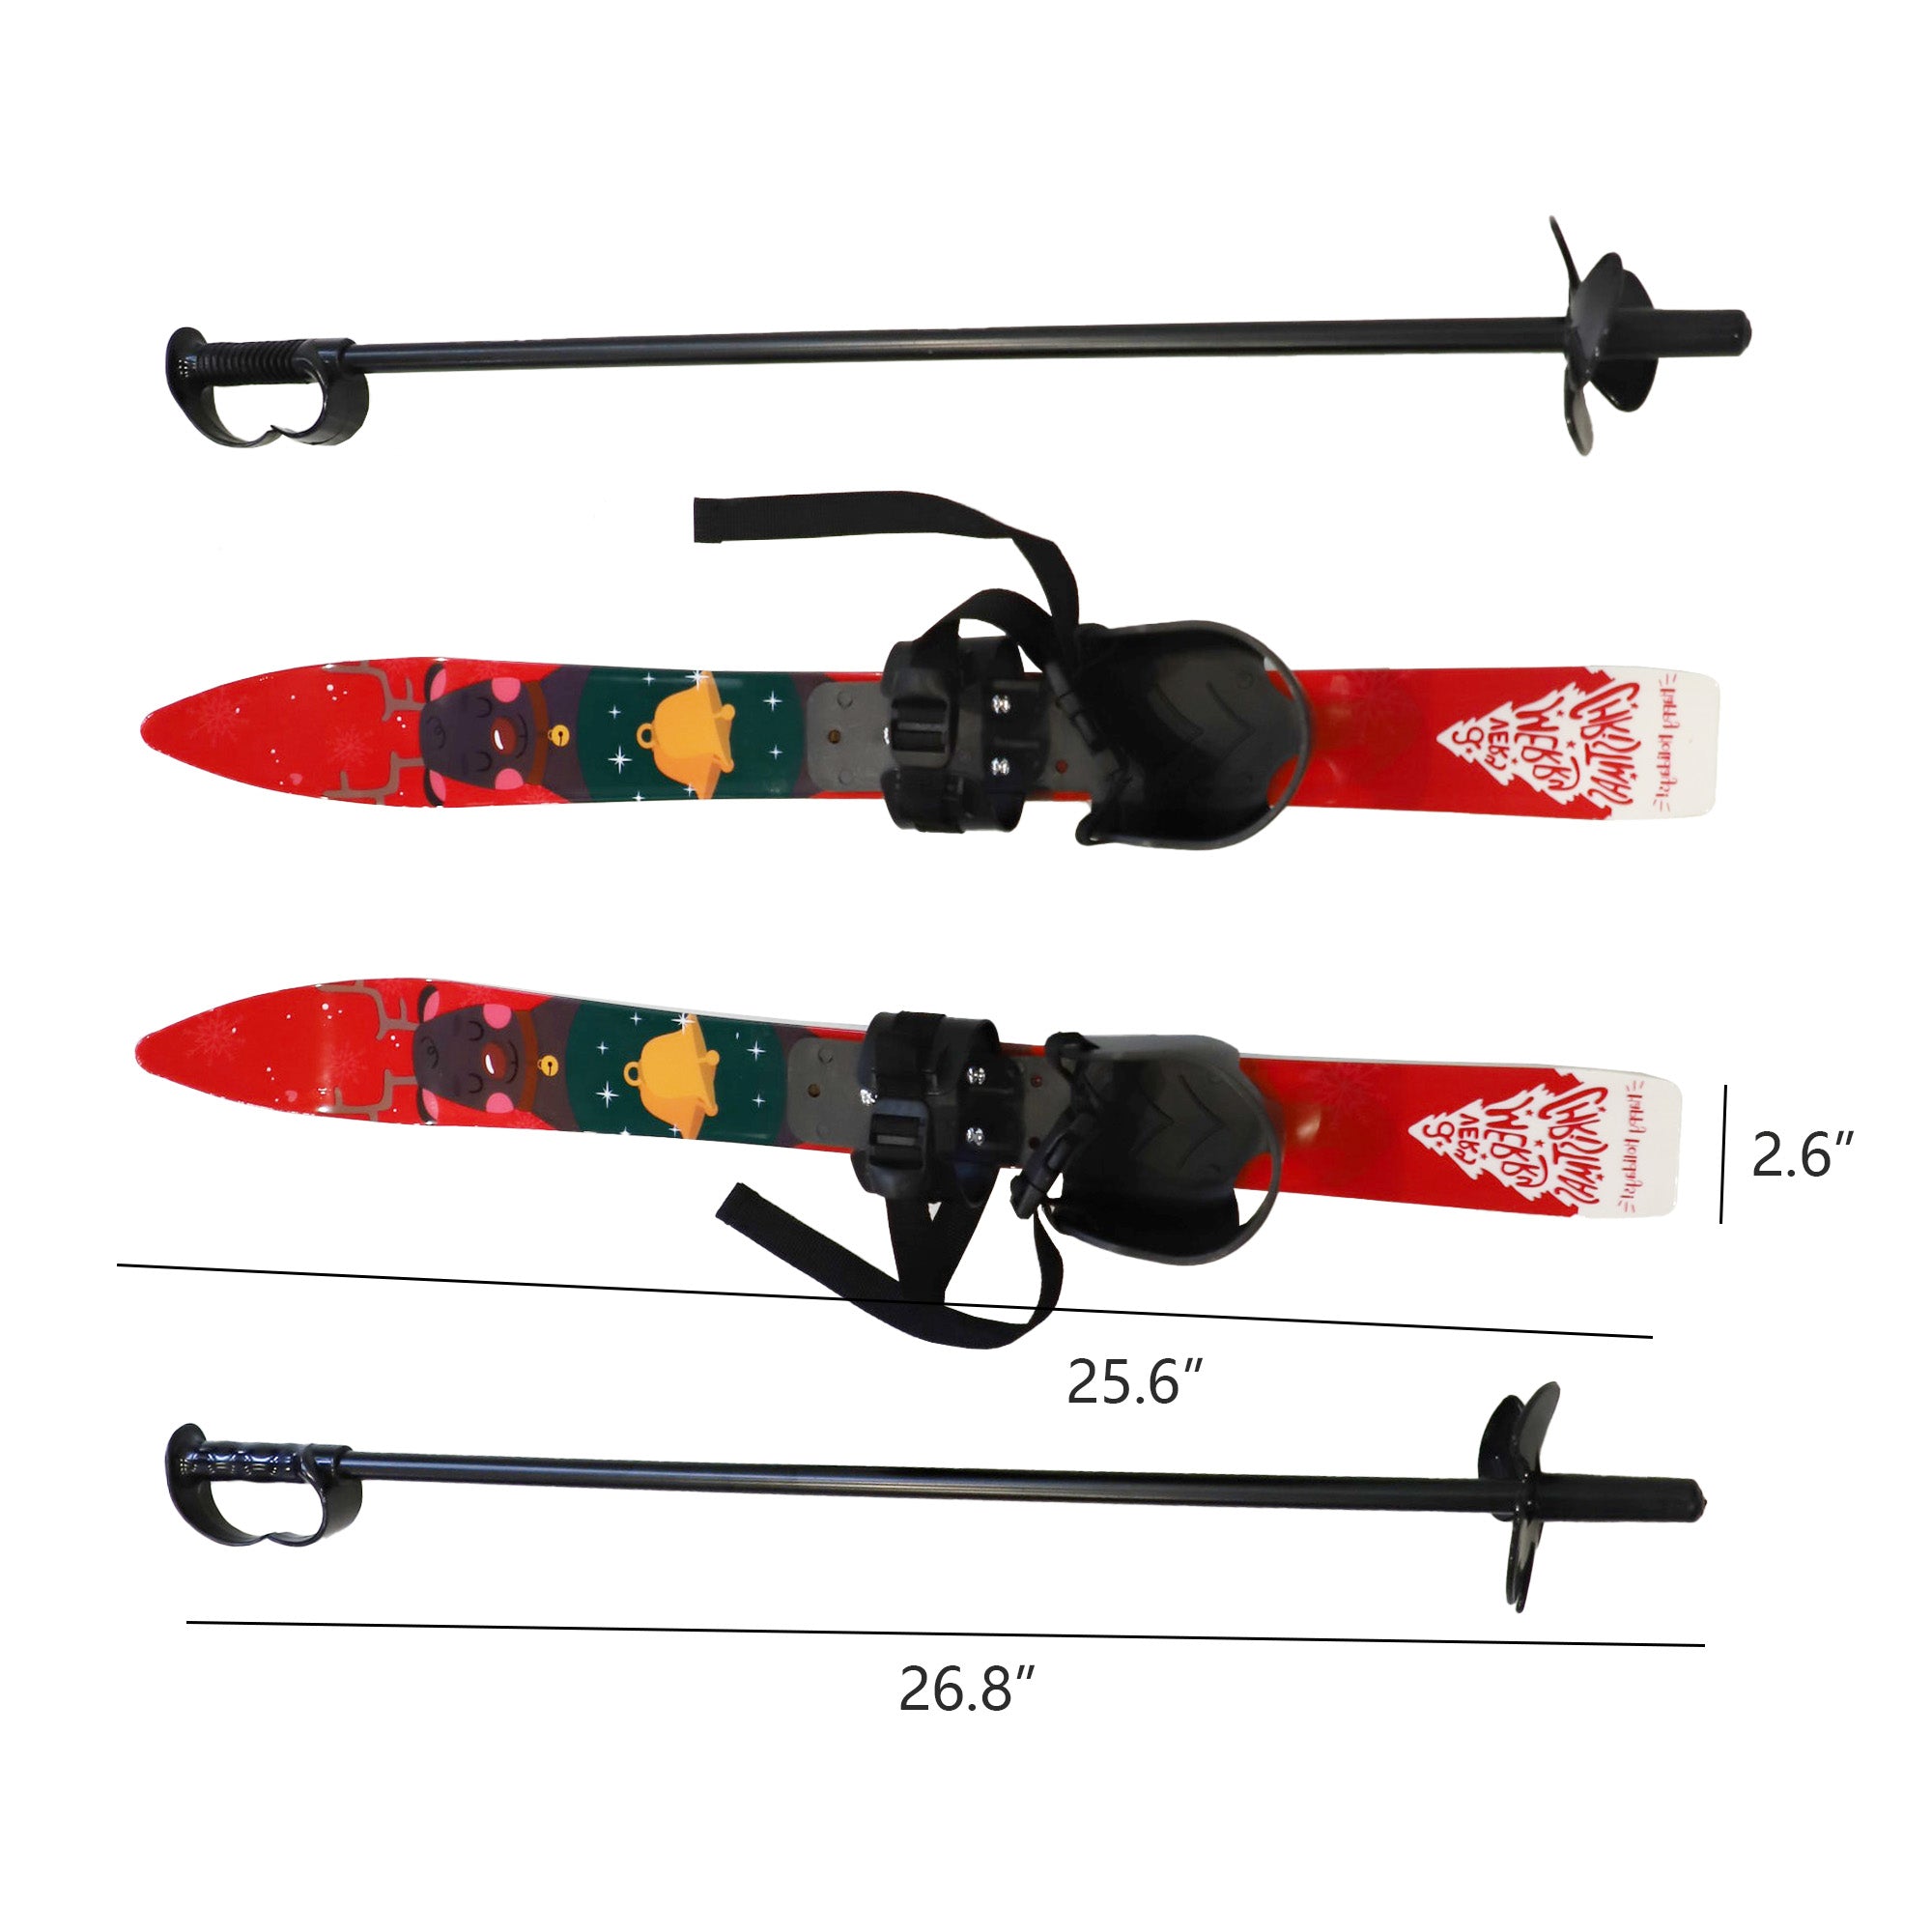 Kids Skis and Poles with Bindings for Age 2-4 Beginner Snow Skis 25.6", Red